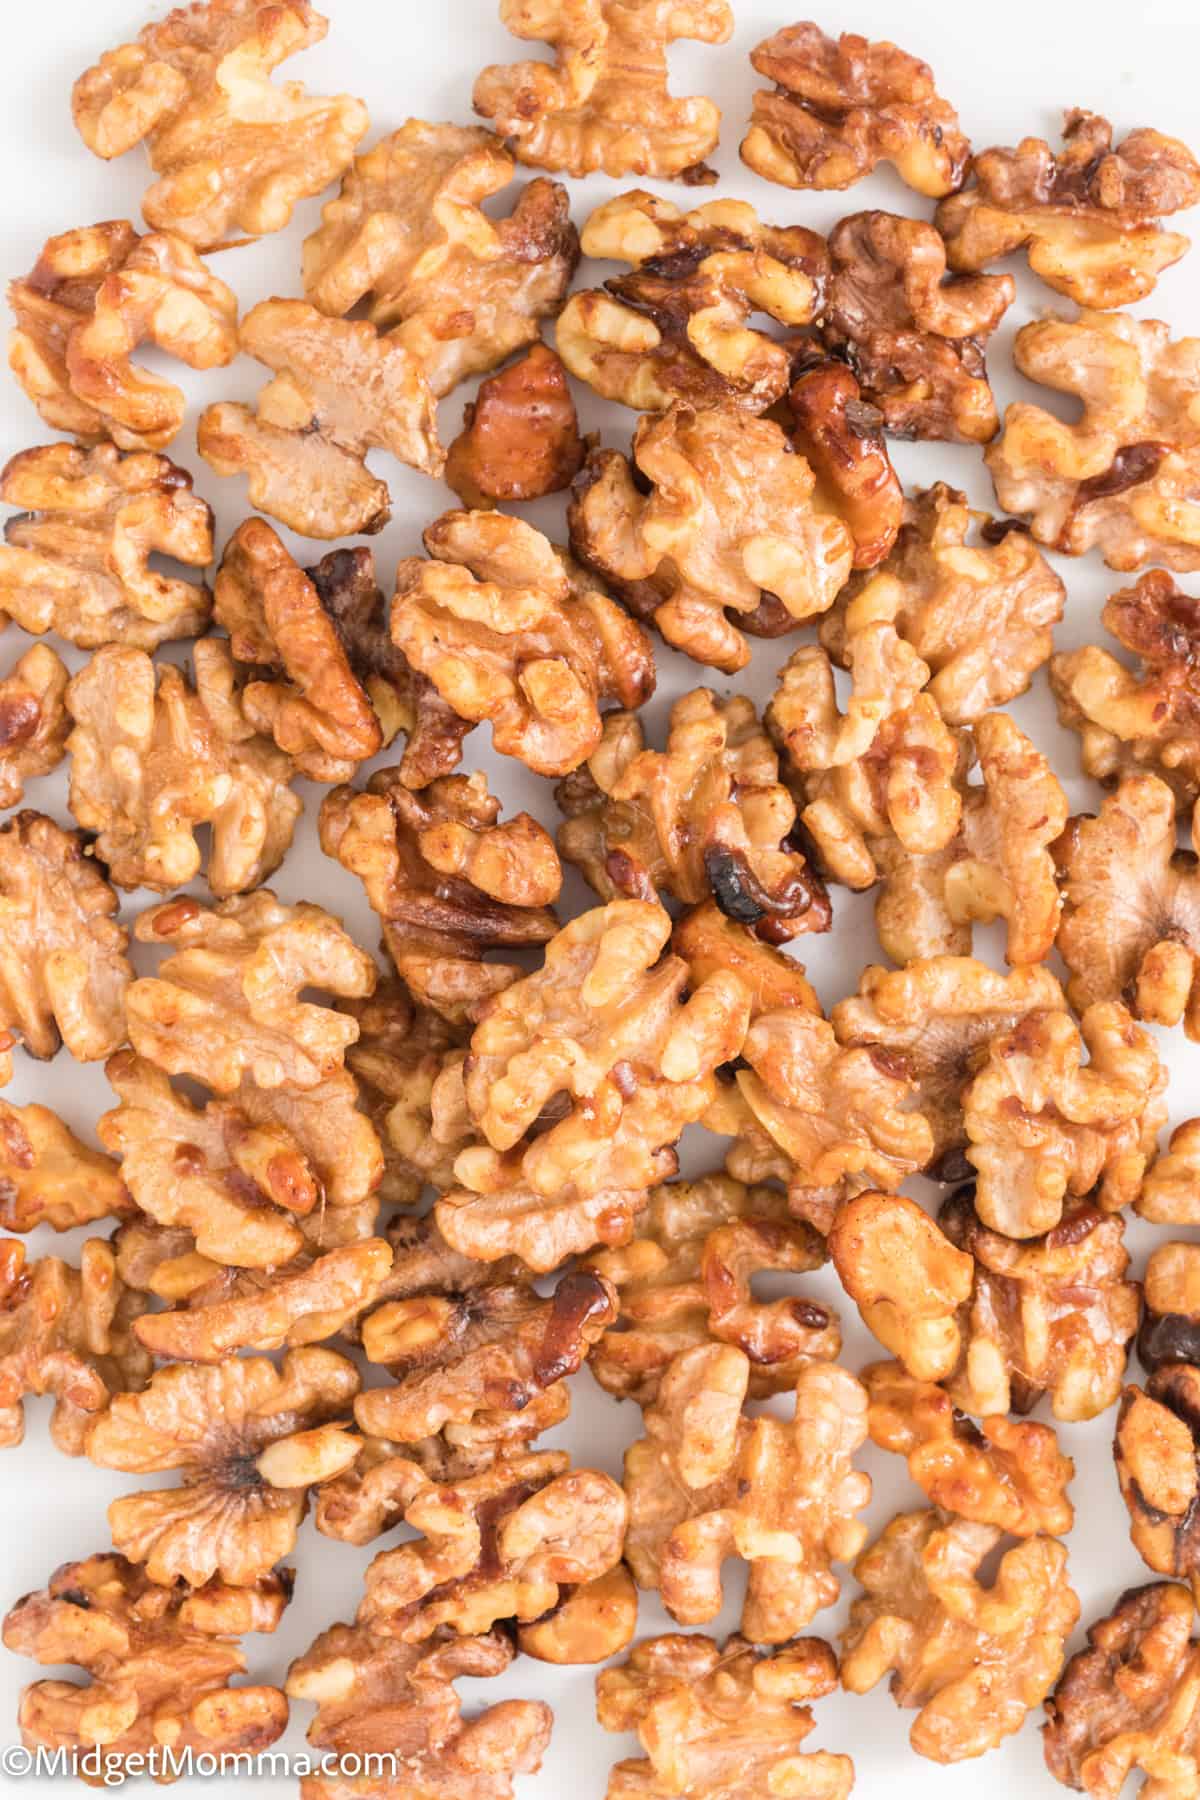 Candied Walnuts on a baking sheet